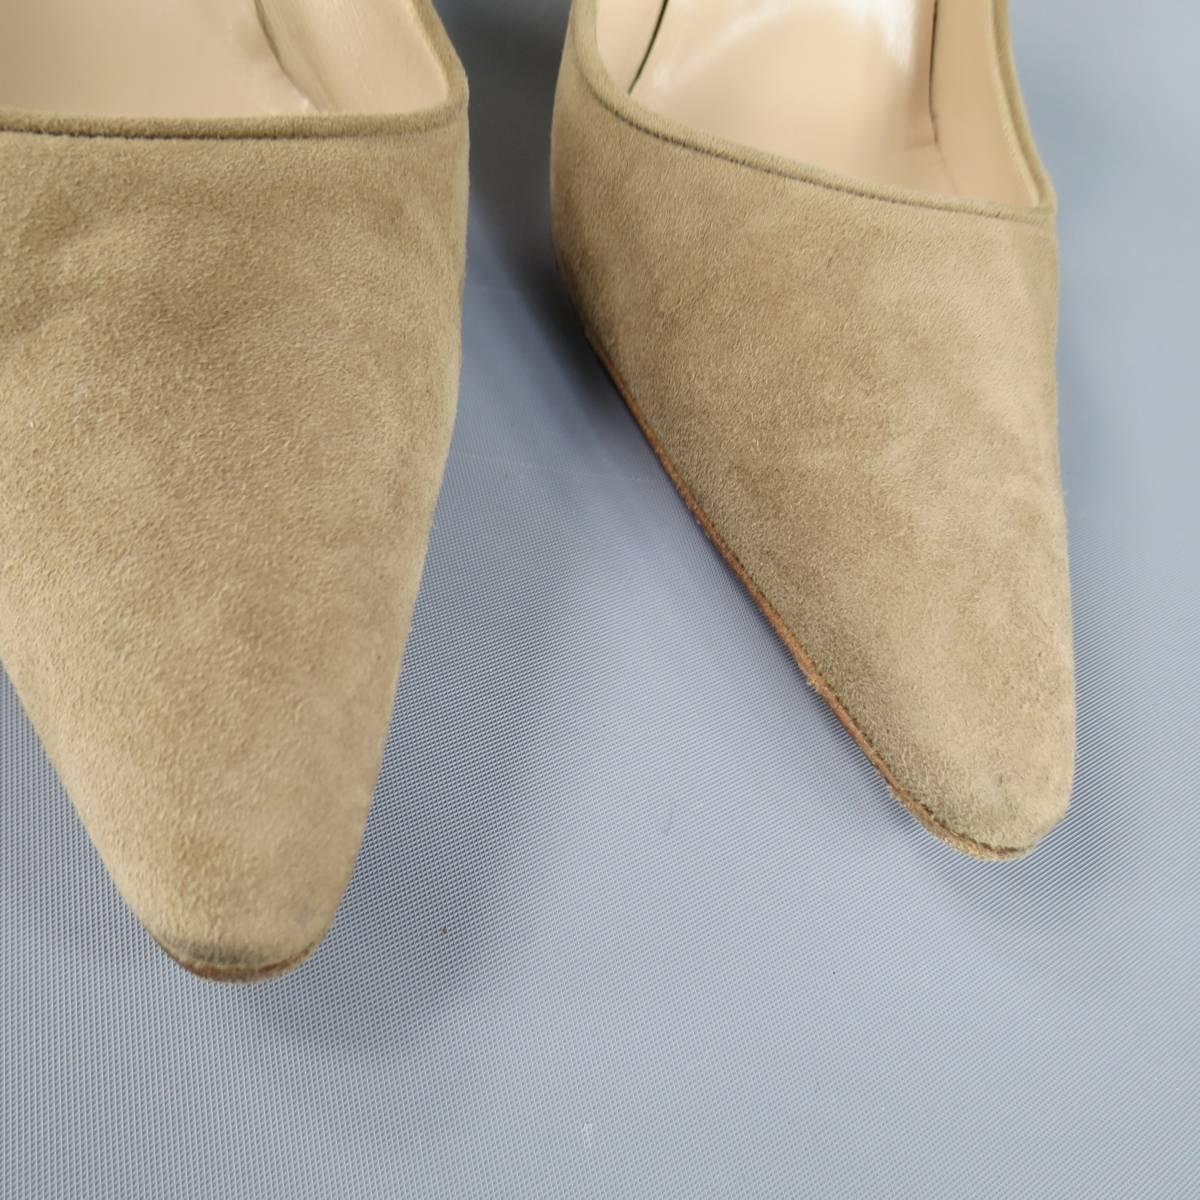 Women's MANOLO BLAHNIK Size 8 Taupe Suede Pointed Toe Pumps